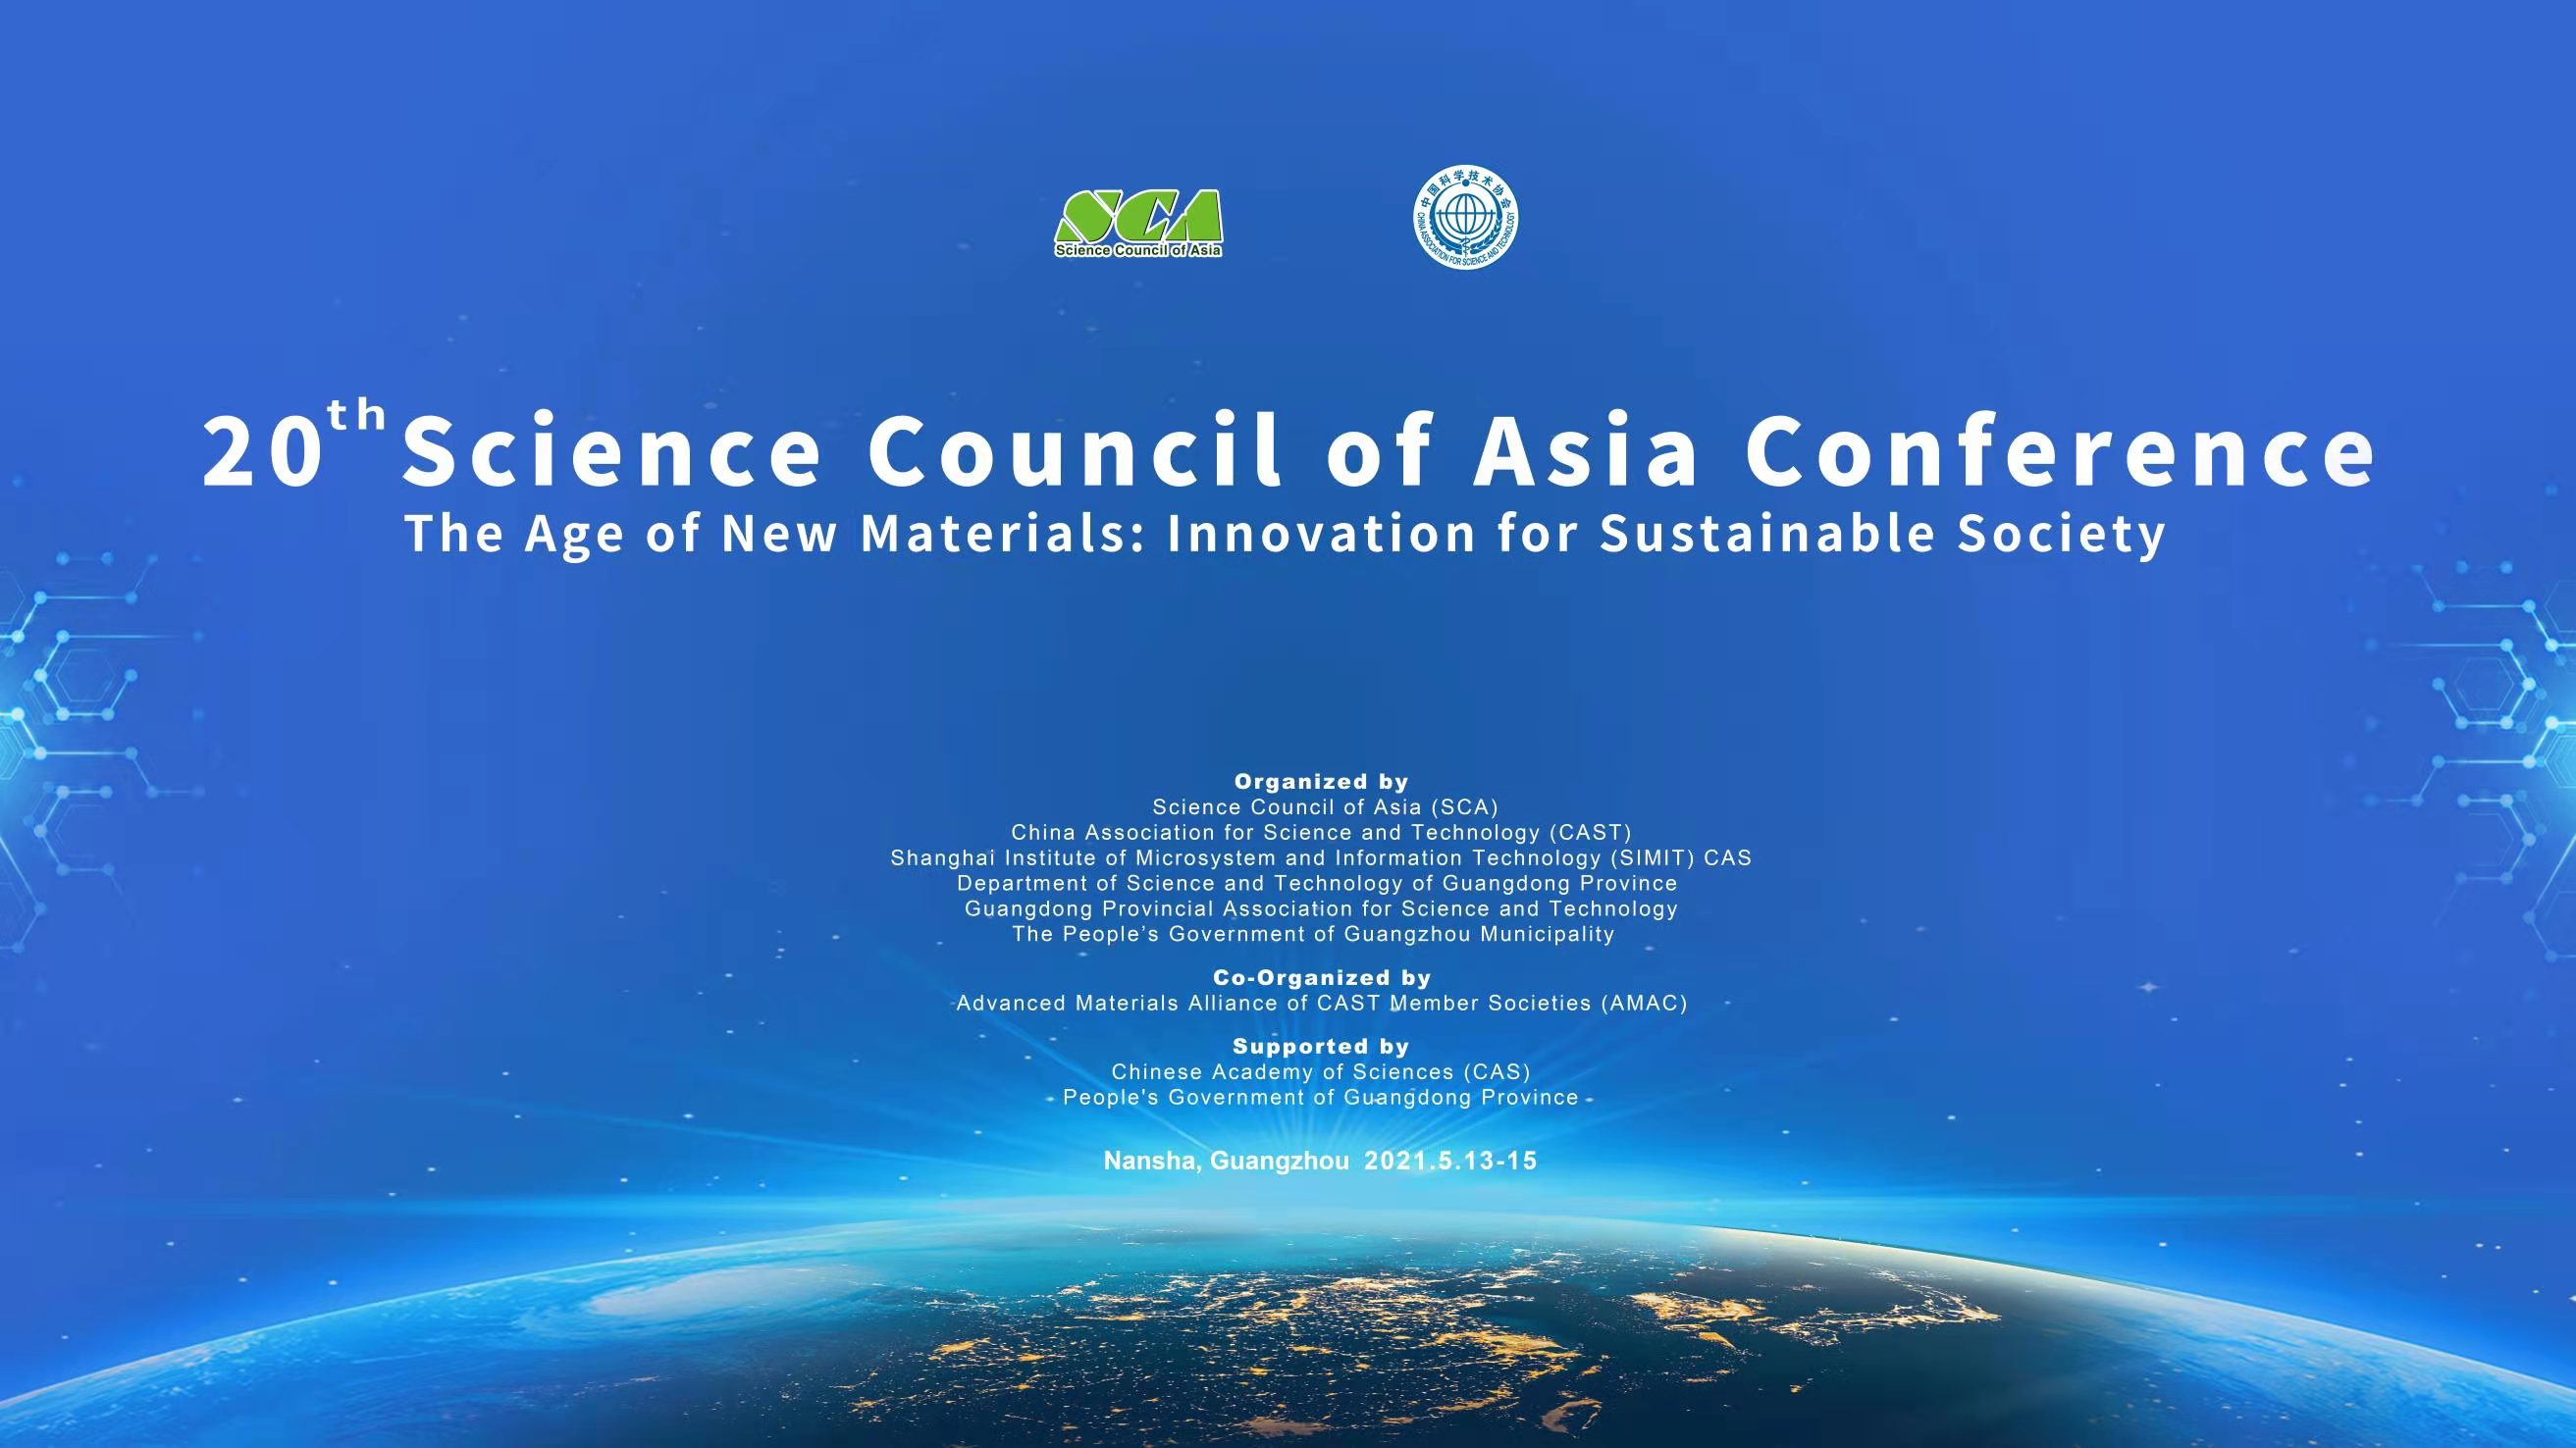 20th Science Council of Asia Conference